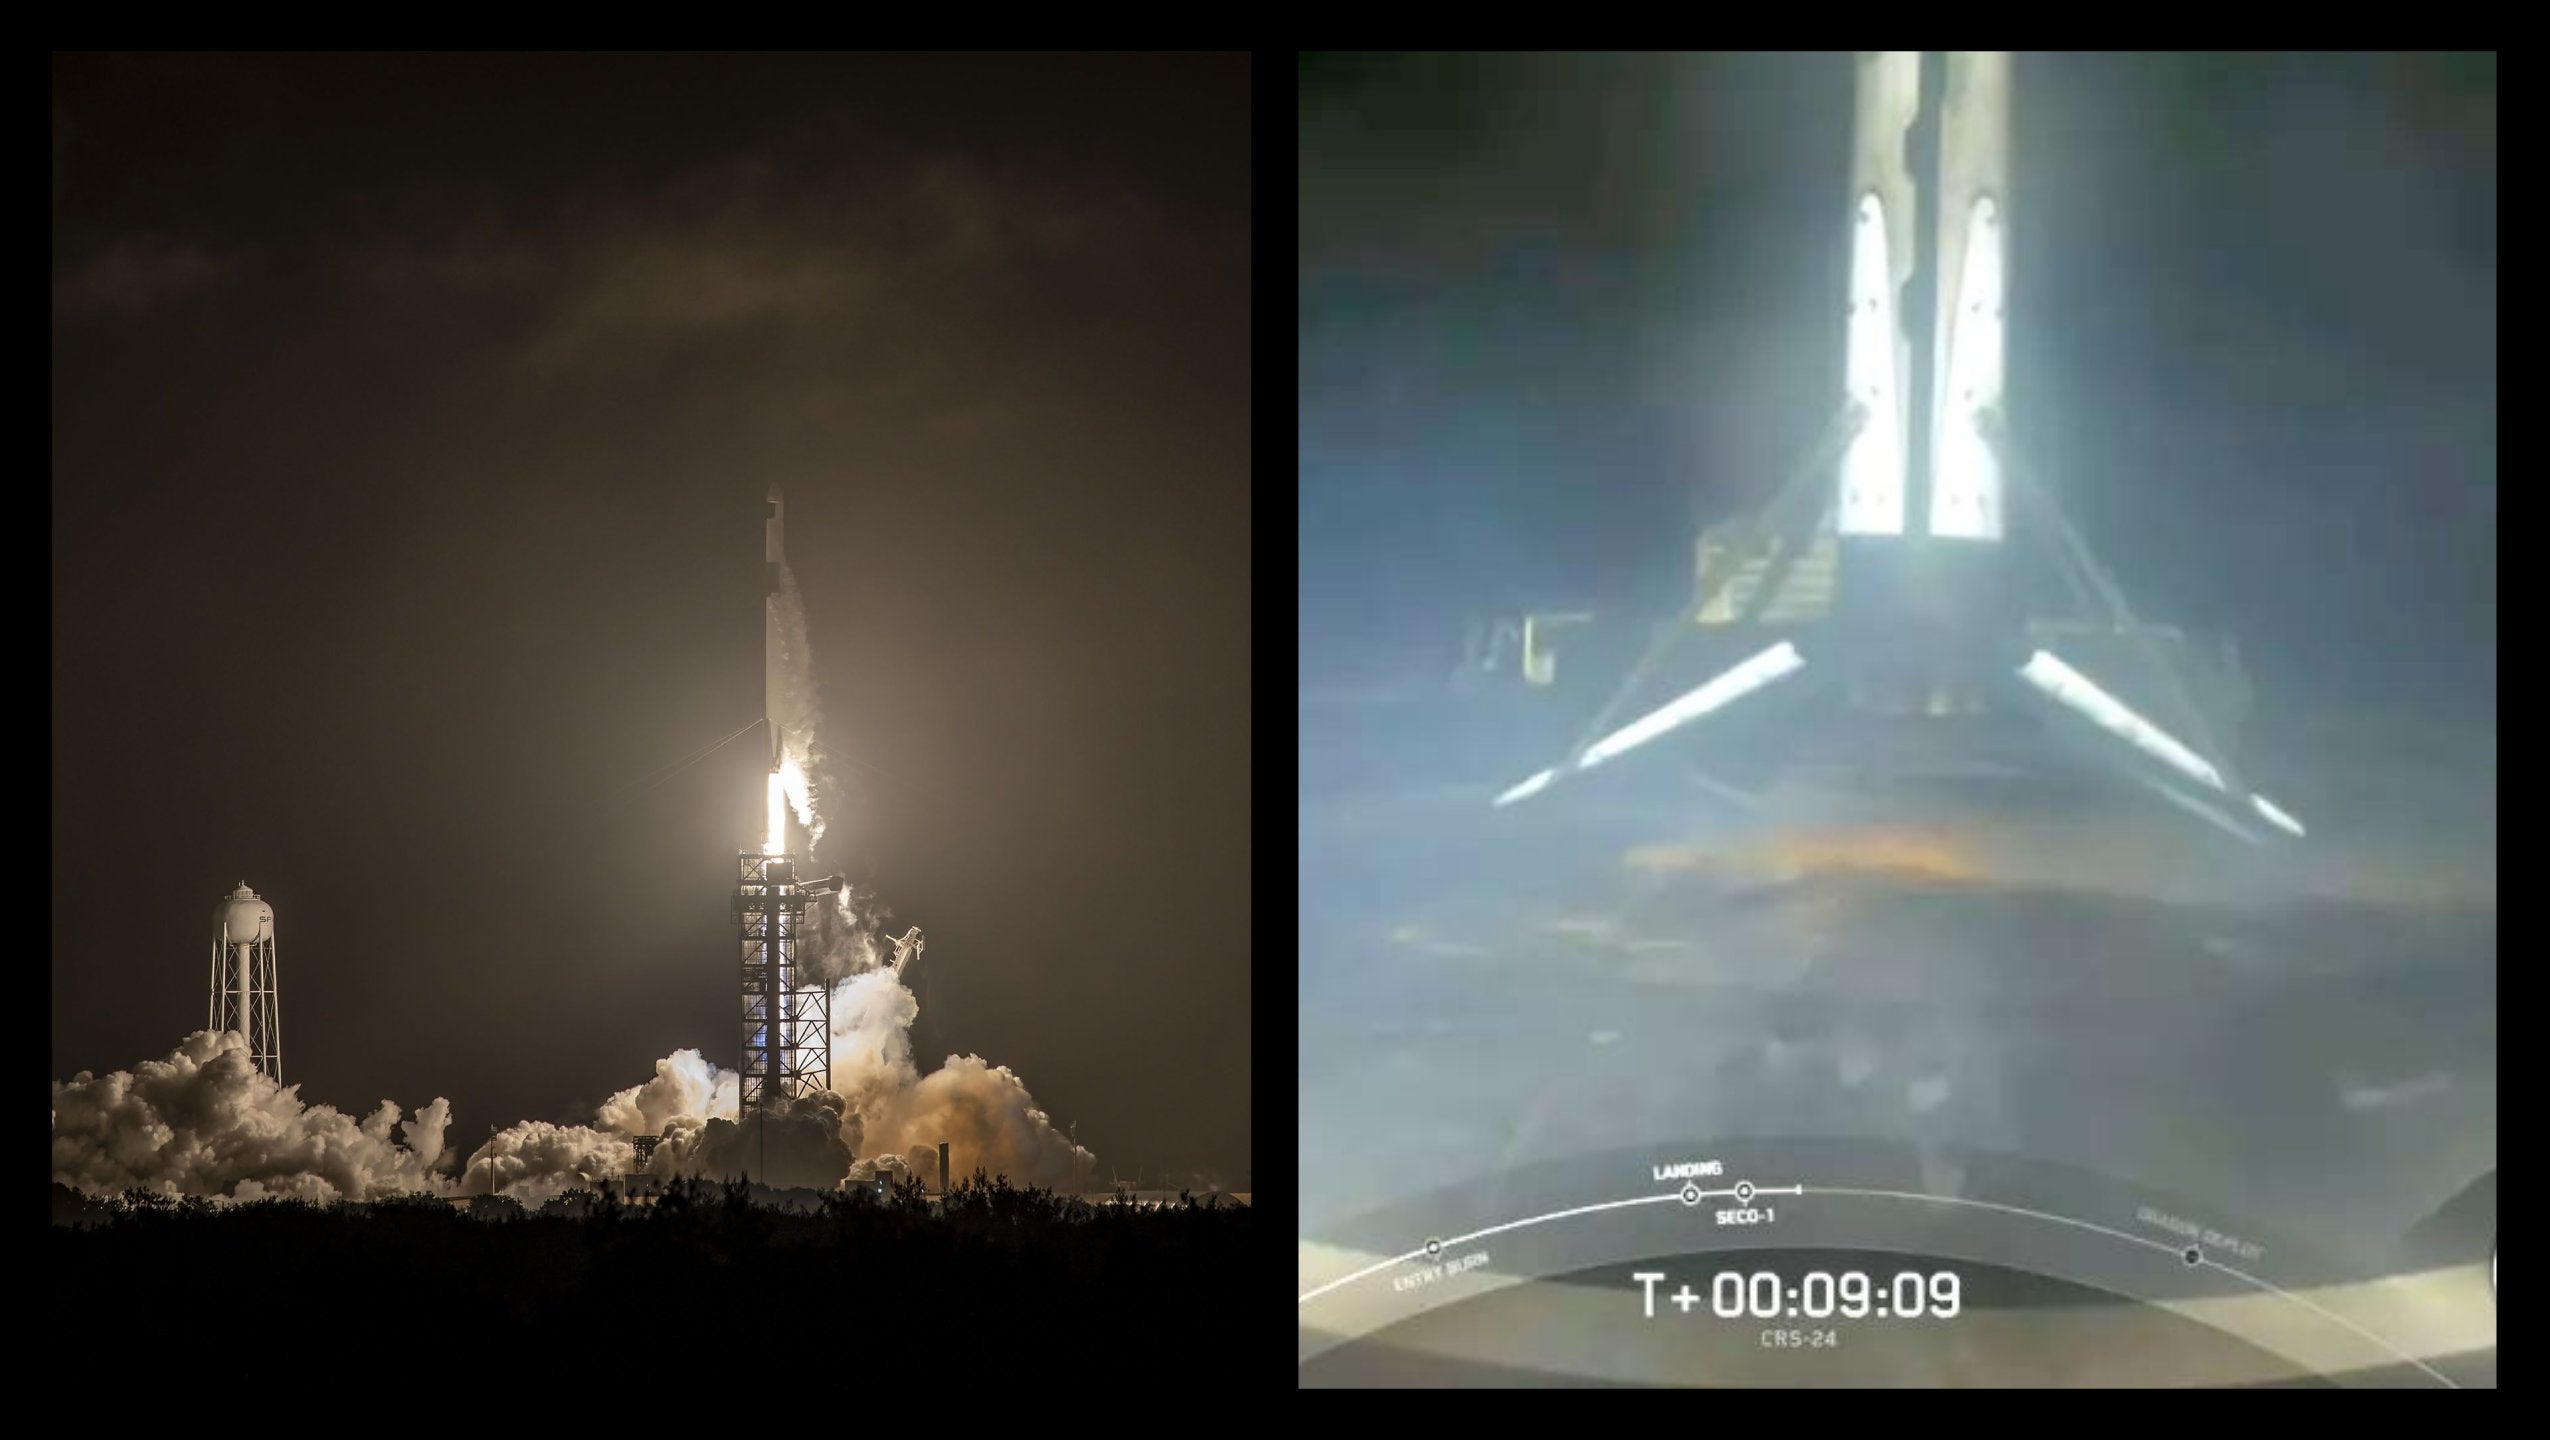 SpaceX Achieves 100th Rocket Landing After Launching Dragon To Deliver Science Cargo & Holiday Treats To The Space Station